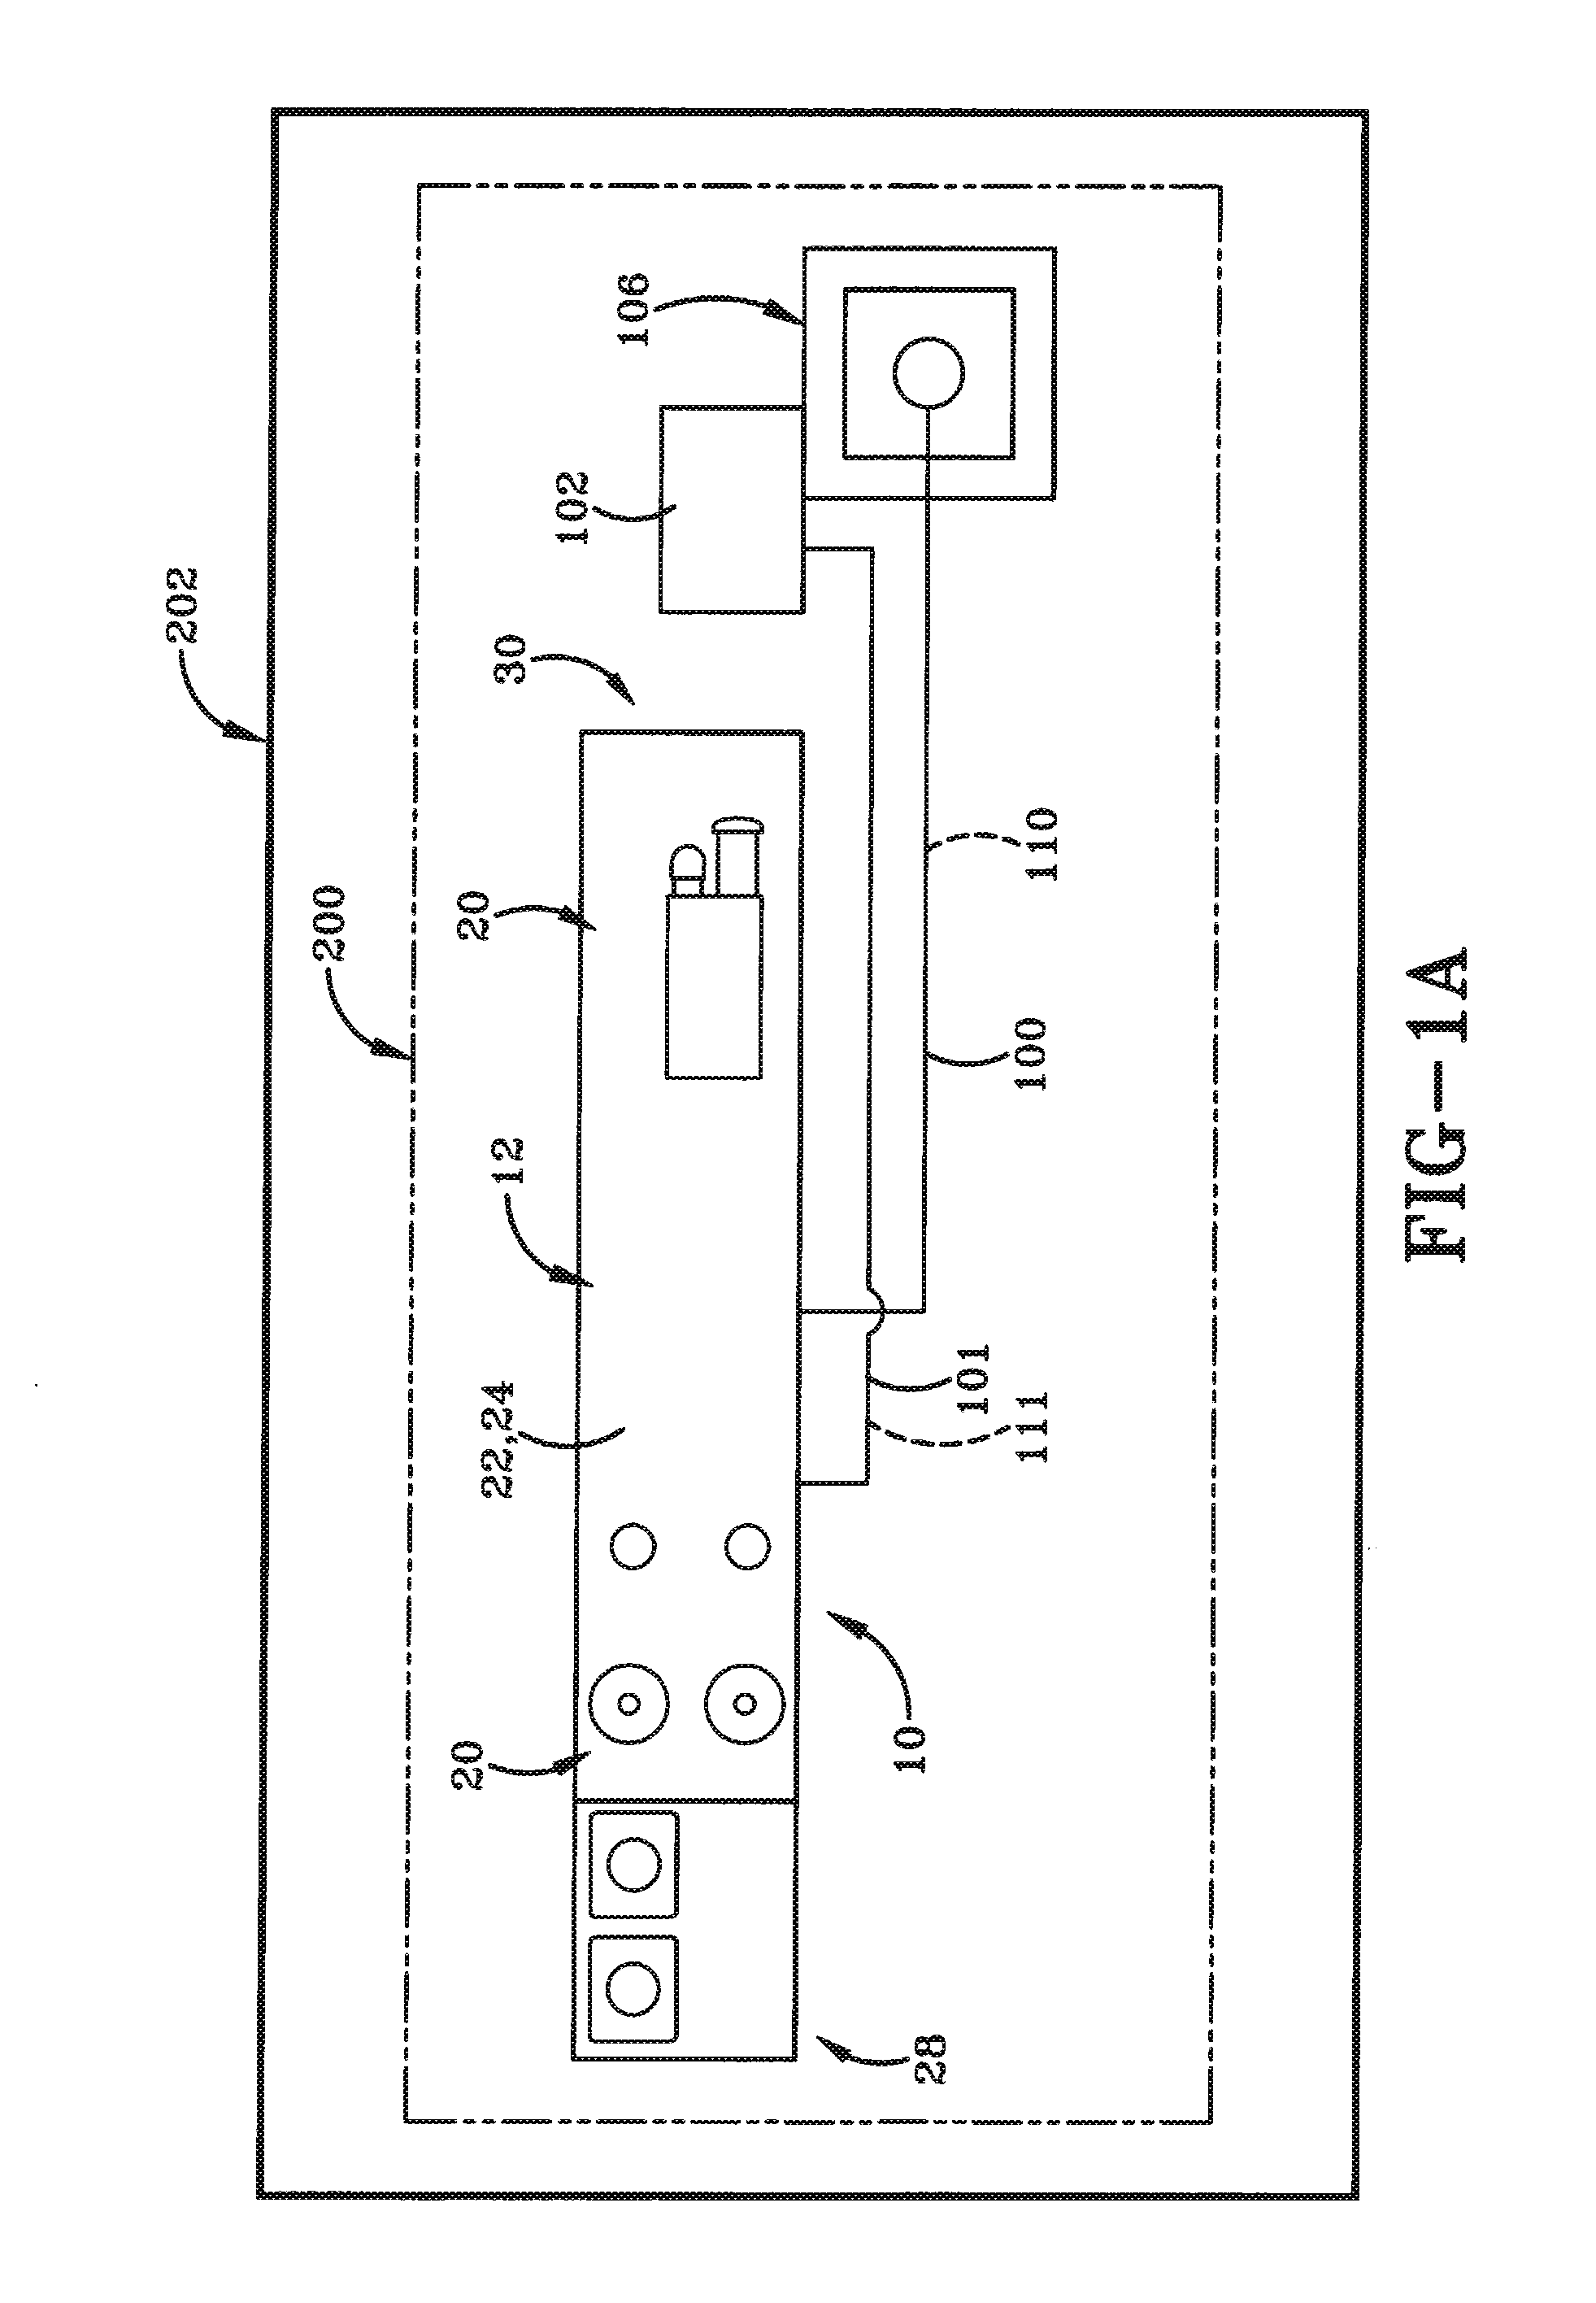 Method for operating a gas processing system